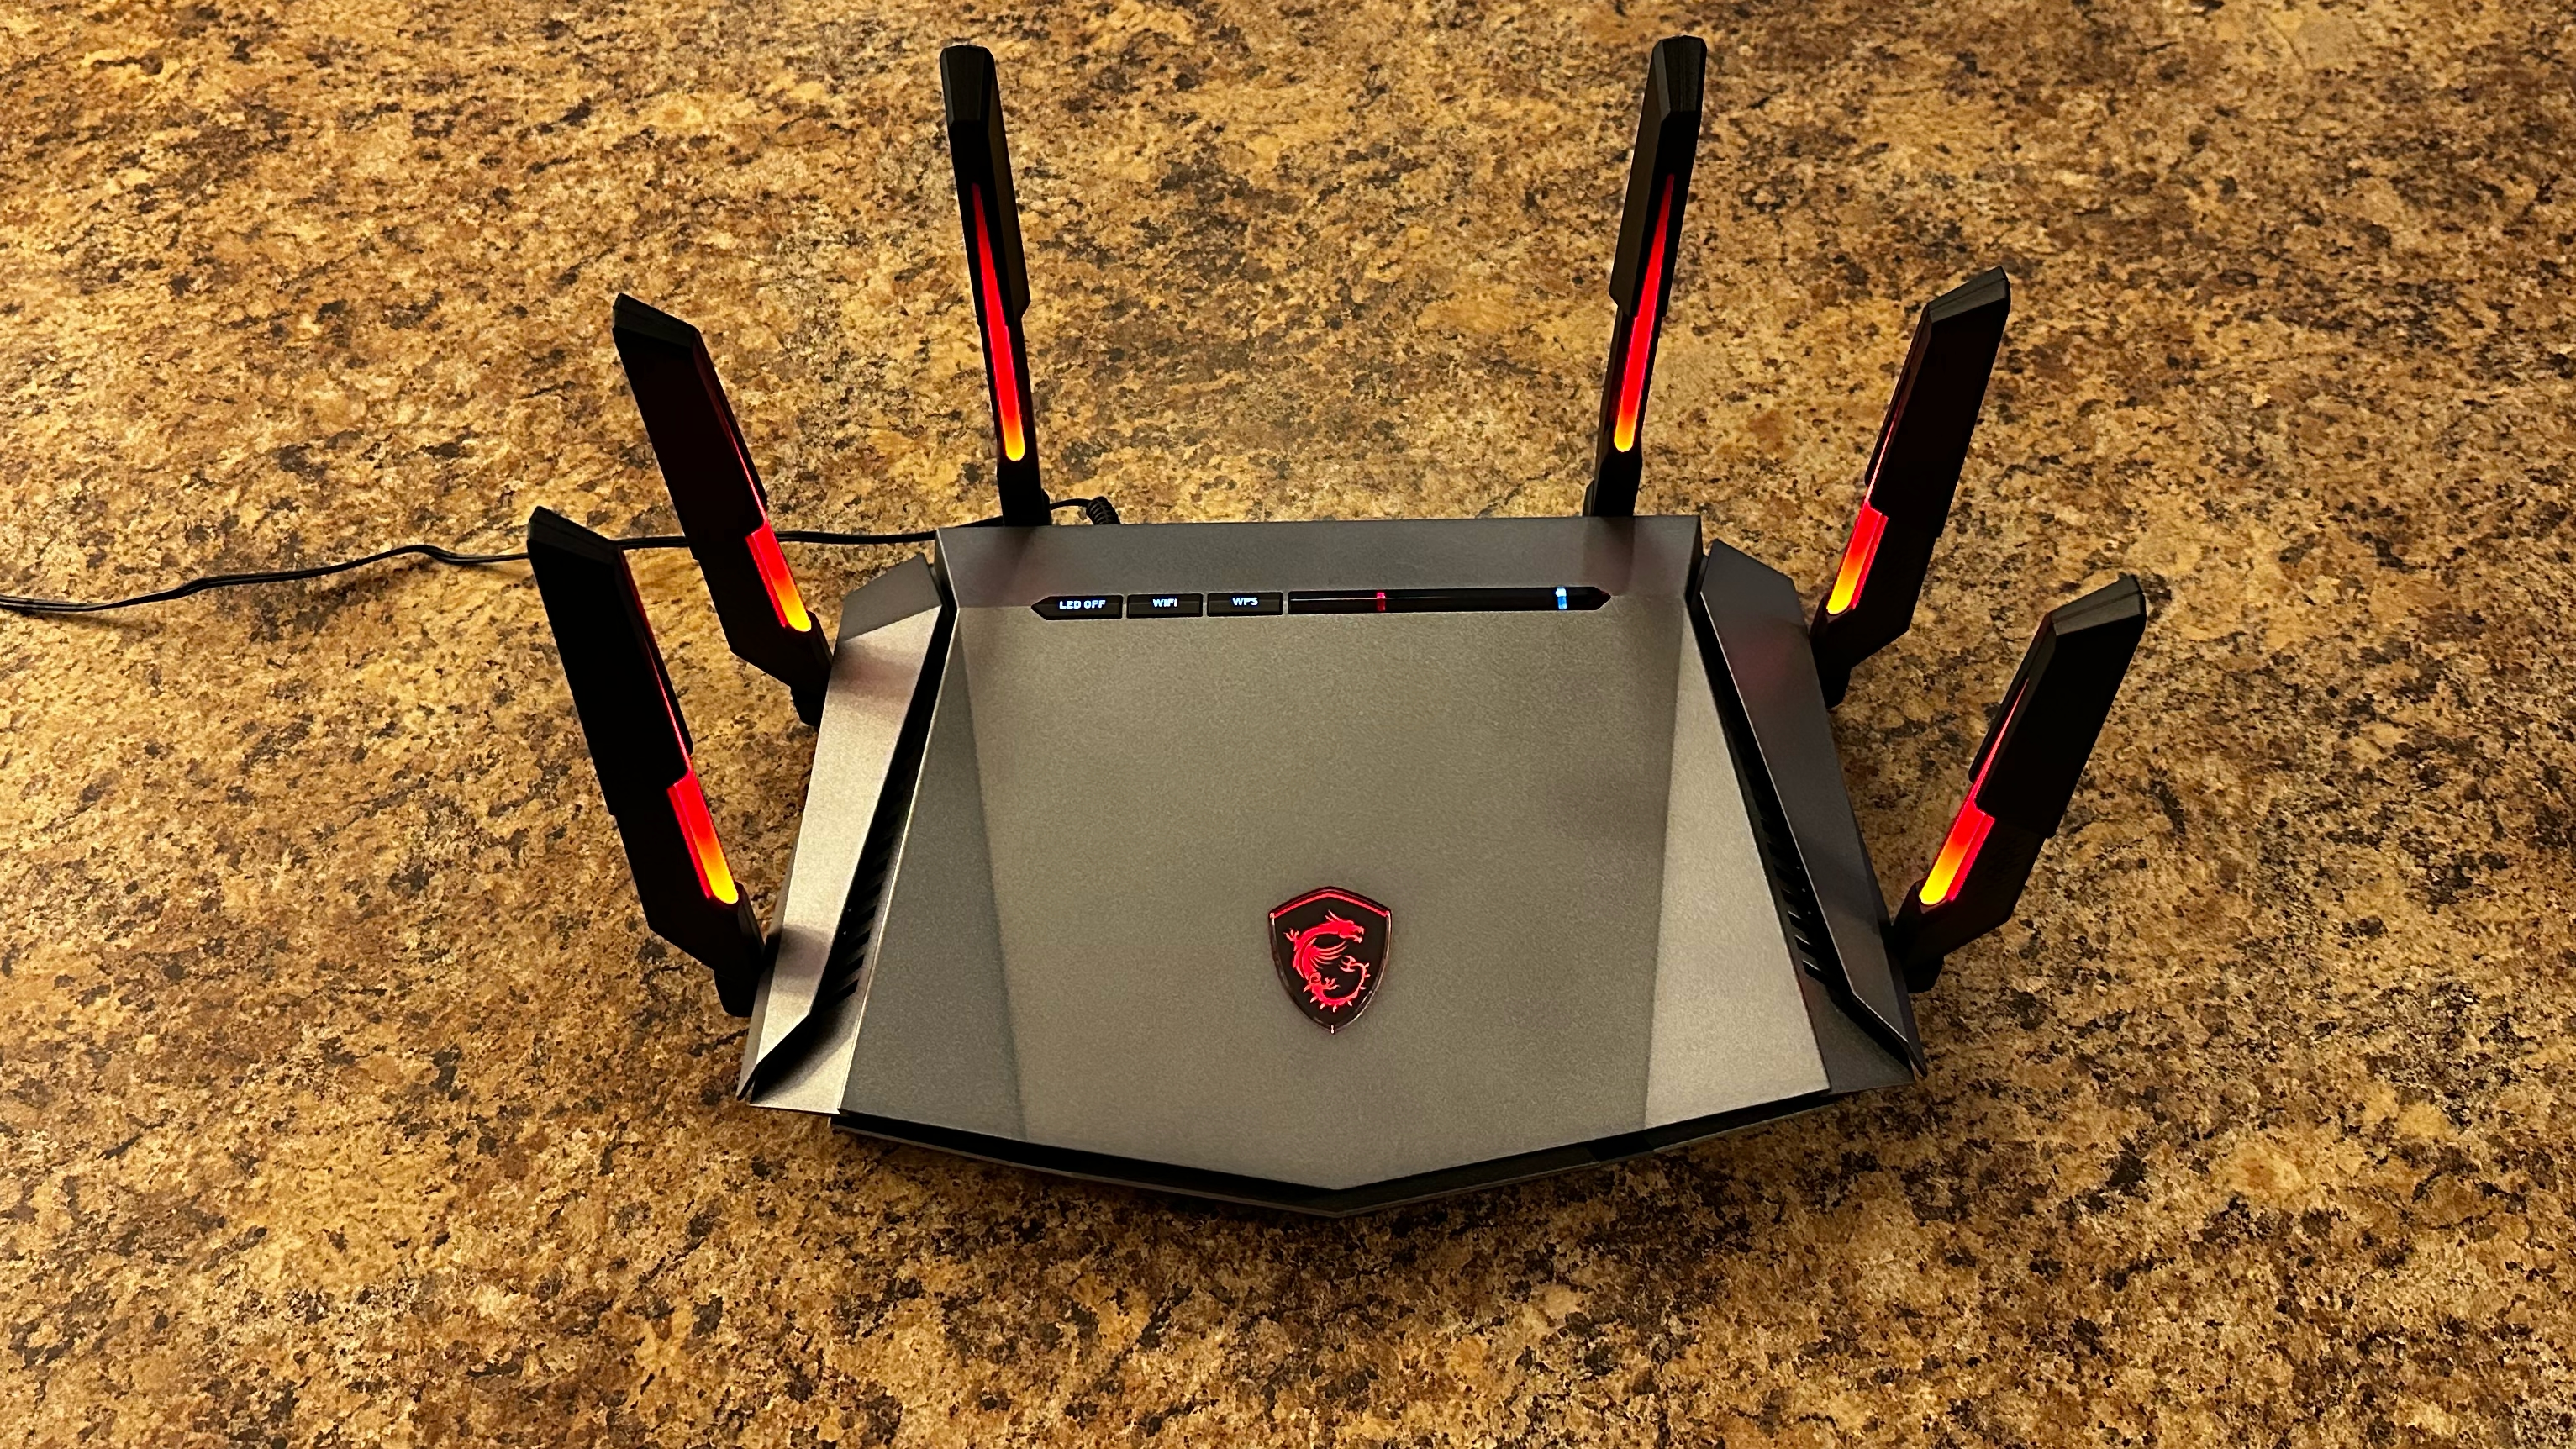 MSI RadiX AXE6600 Tri-Band Router Review – Design & Features - GeekaWhat